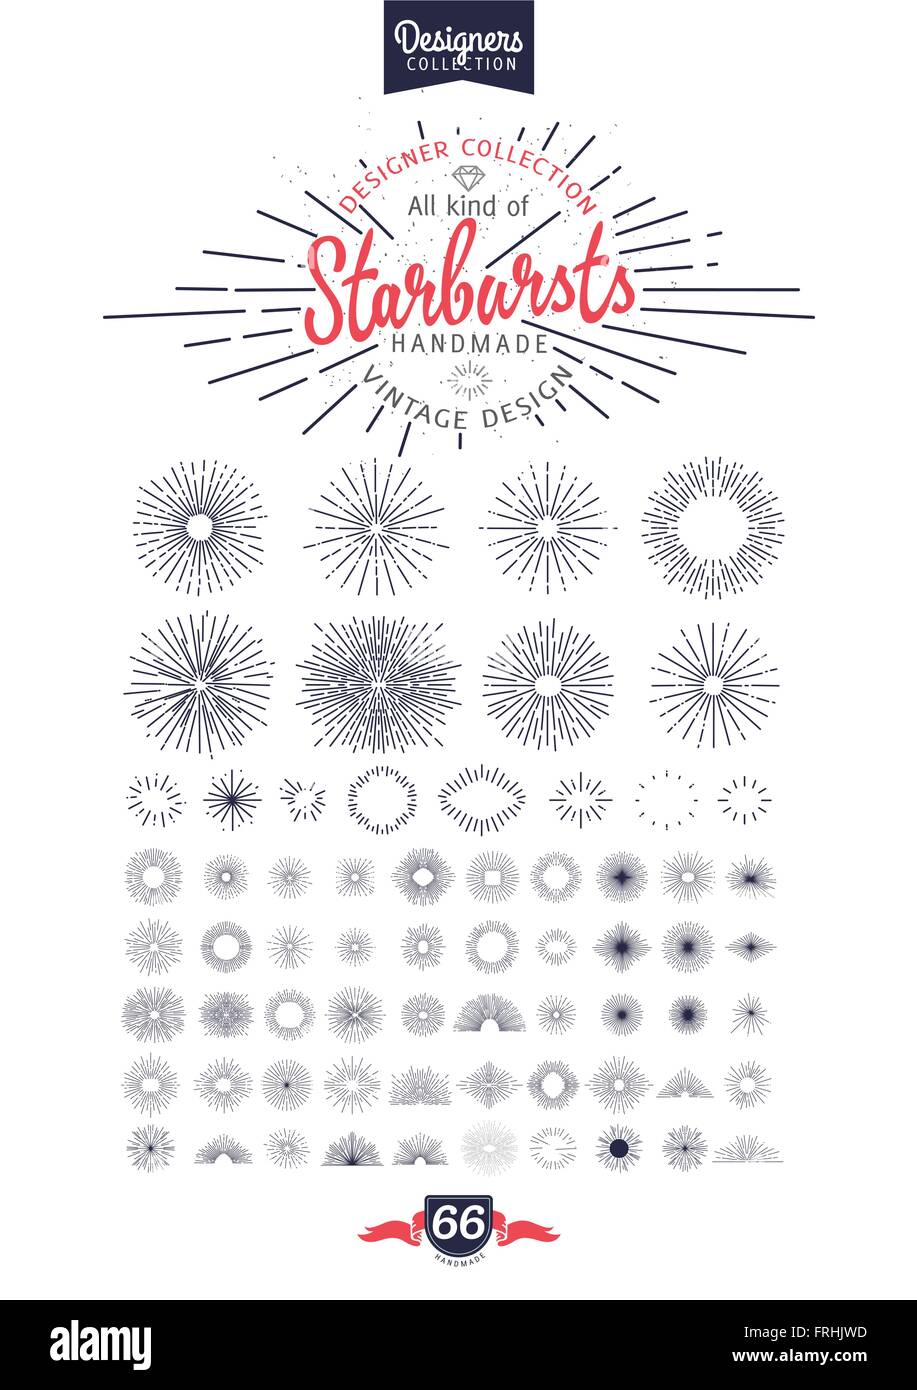 66 Premium starbursts collection. Designers Collection Stock Vector